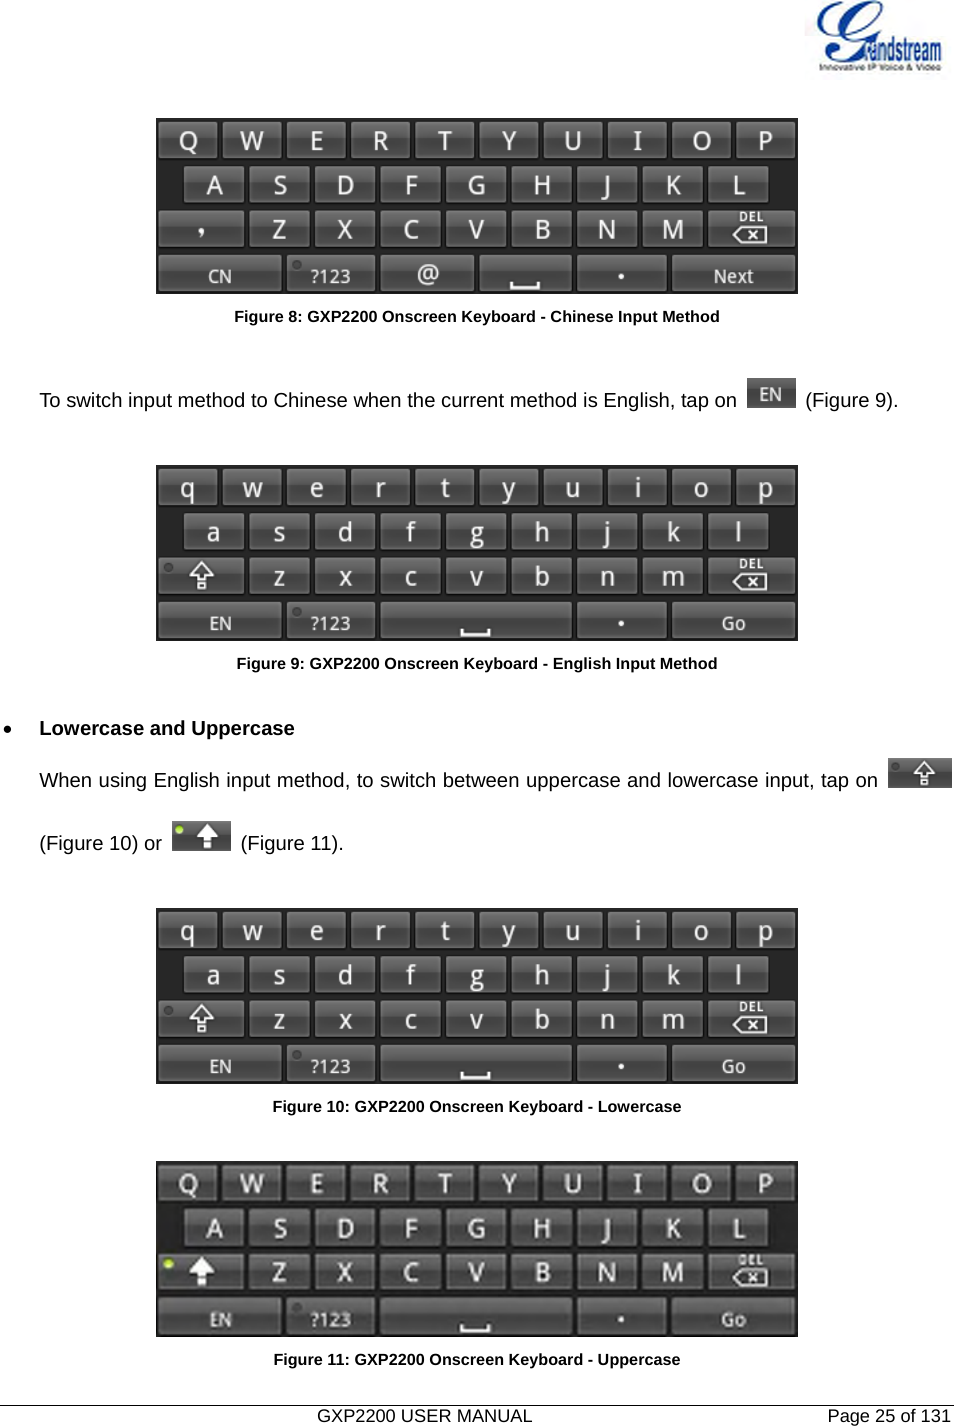   GXP2200 USER MANUAL       Page 25 of 131                                    Figure 8: GXP2200 Onscreen Keyboard - Chinese Input Method  To switch input method to Chinese when the current method is English, tap on   (Figure 9).   Figure 9: GXP2200 Onscreen Keyboard - English Input Method  • Lowercase and Uppercase When using English input method, to switch between uppercase and lowercase input, tap on   (Figure 10) or   (Figure 11).   Figure 10: GXP2200 Onscreen Keyboard - Lowercase   Figure 11: GXP2200 Onscreen Keyboard - Uppercase 